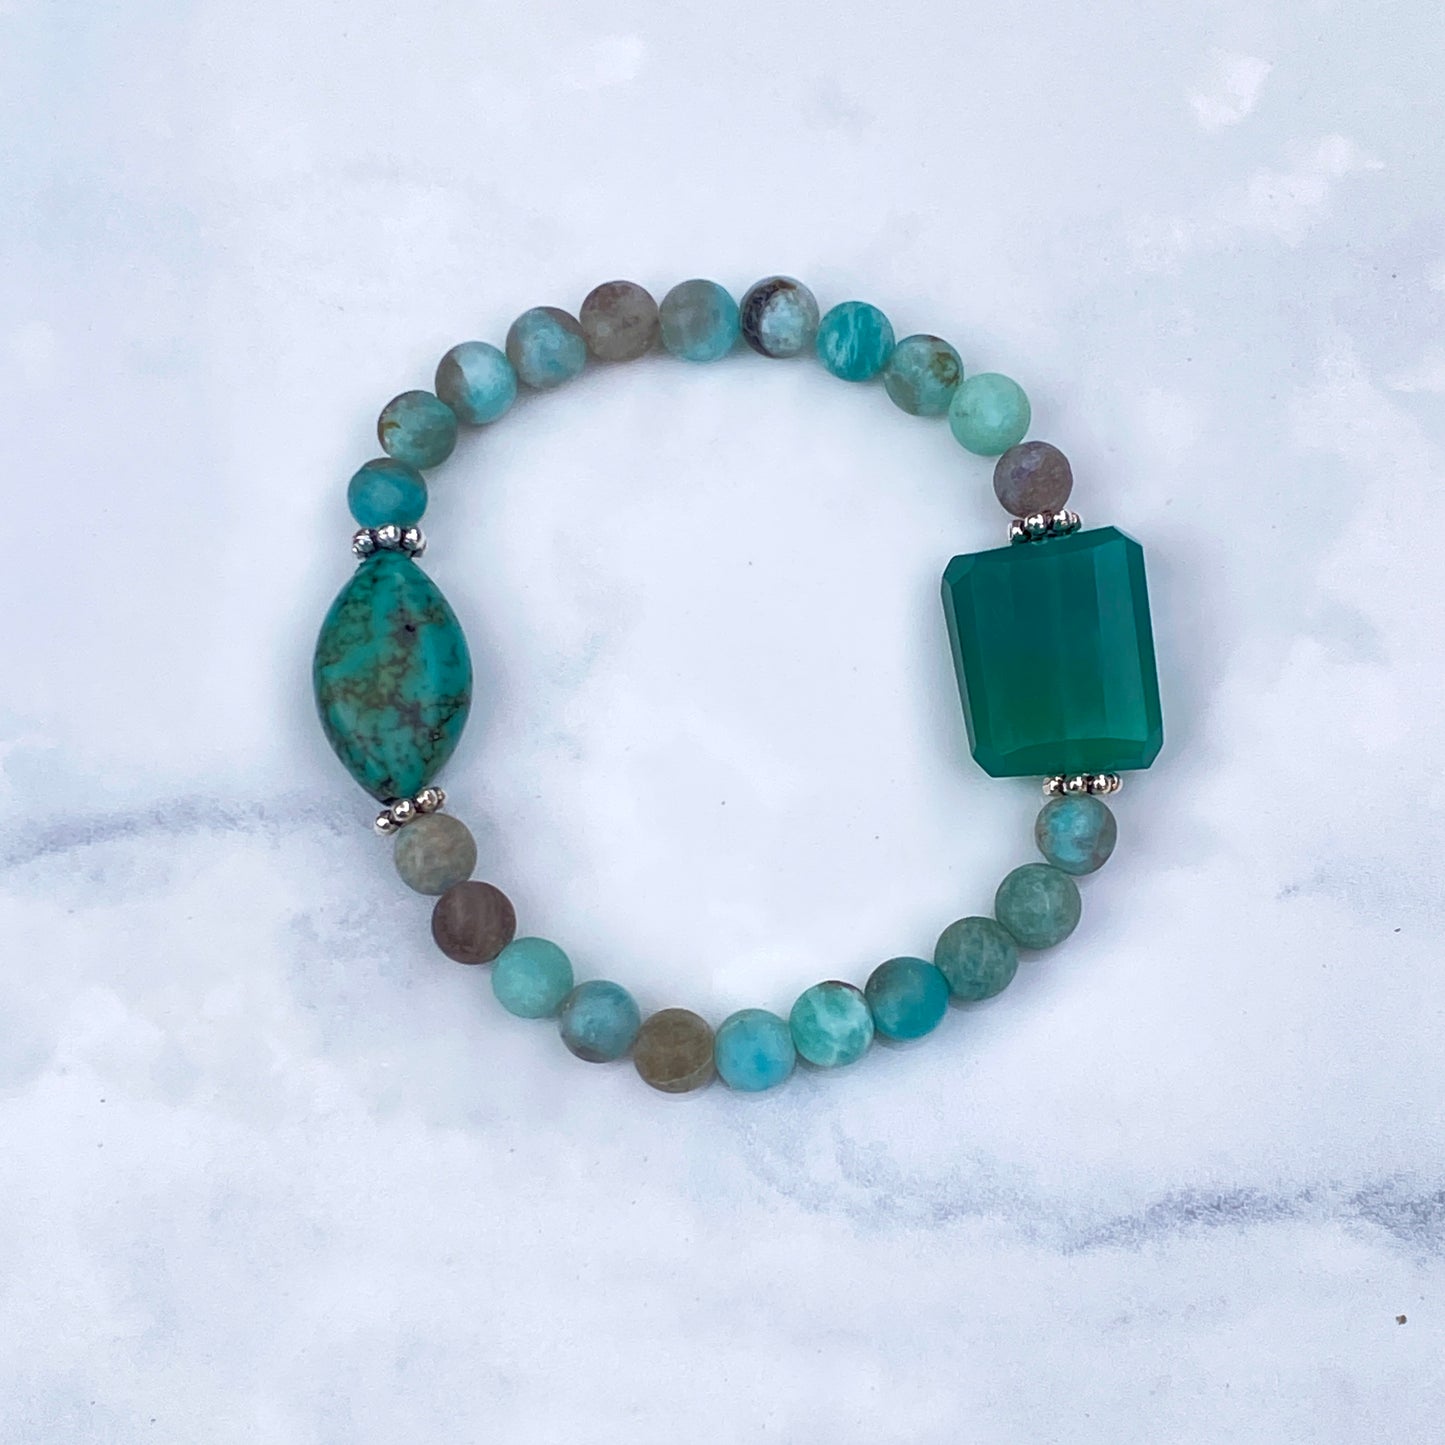 Green onyx, Amazonite Gemstone, Natural Turquoise, and Sterling Silver Stretch Bracelet